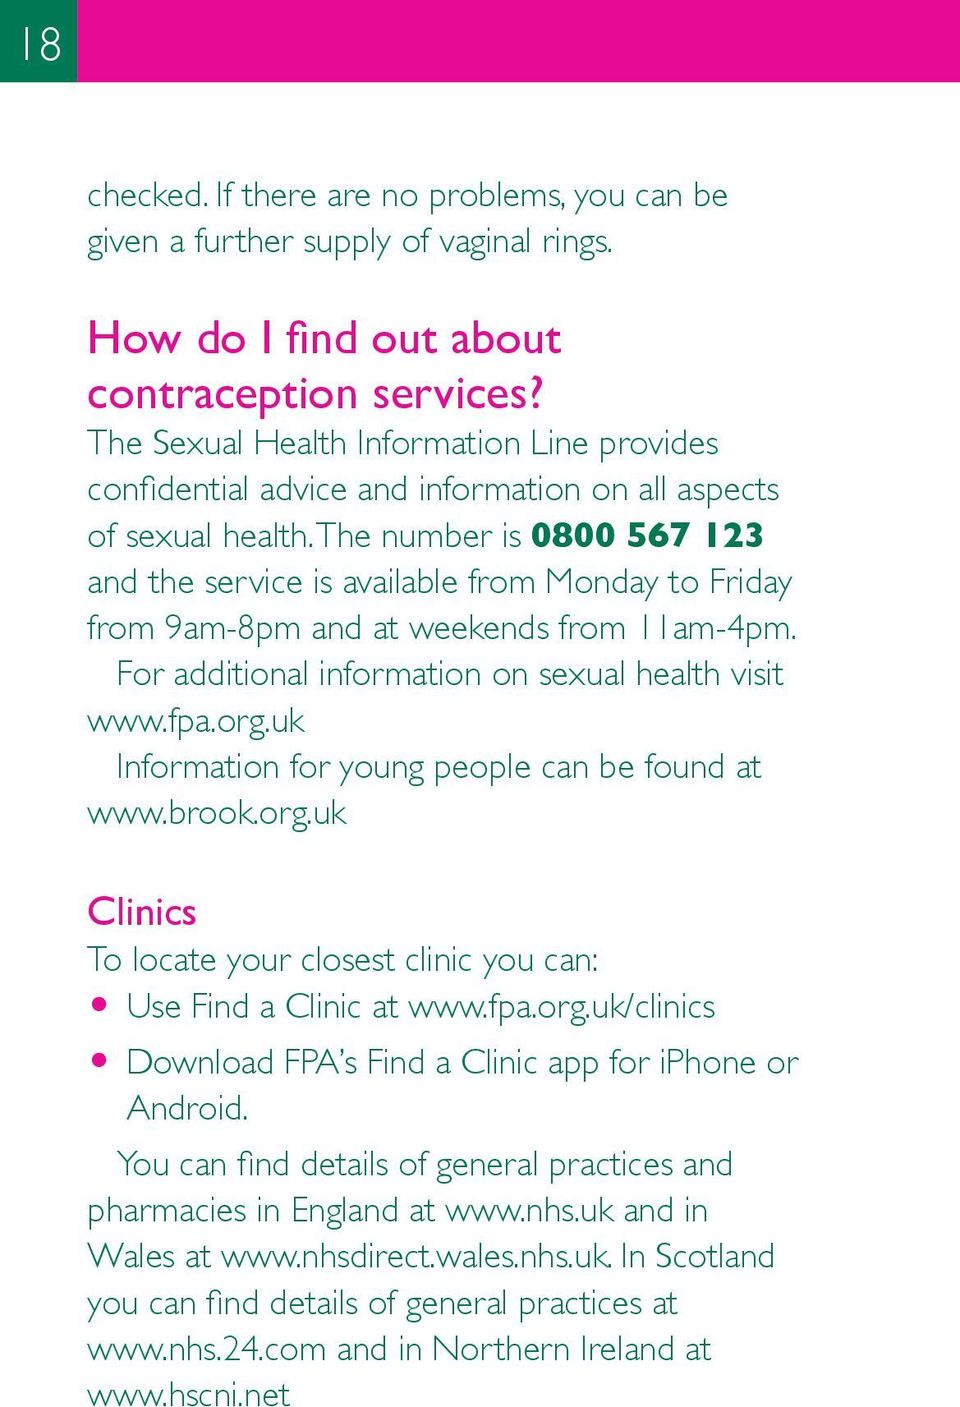 The number is 0800 567 123 and the service is available from Monday to Friday from 9am-8pm and at weekends from 11am-4pm. For additional information on sexual health visit www.fpa.org.